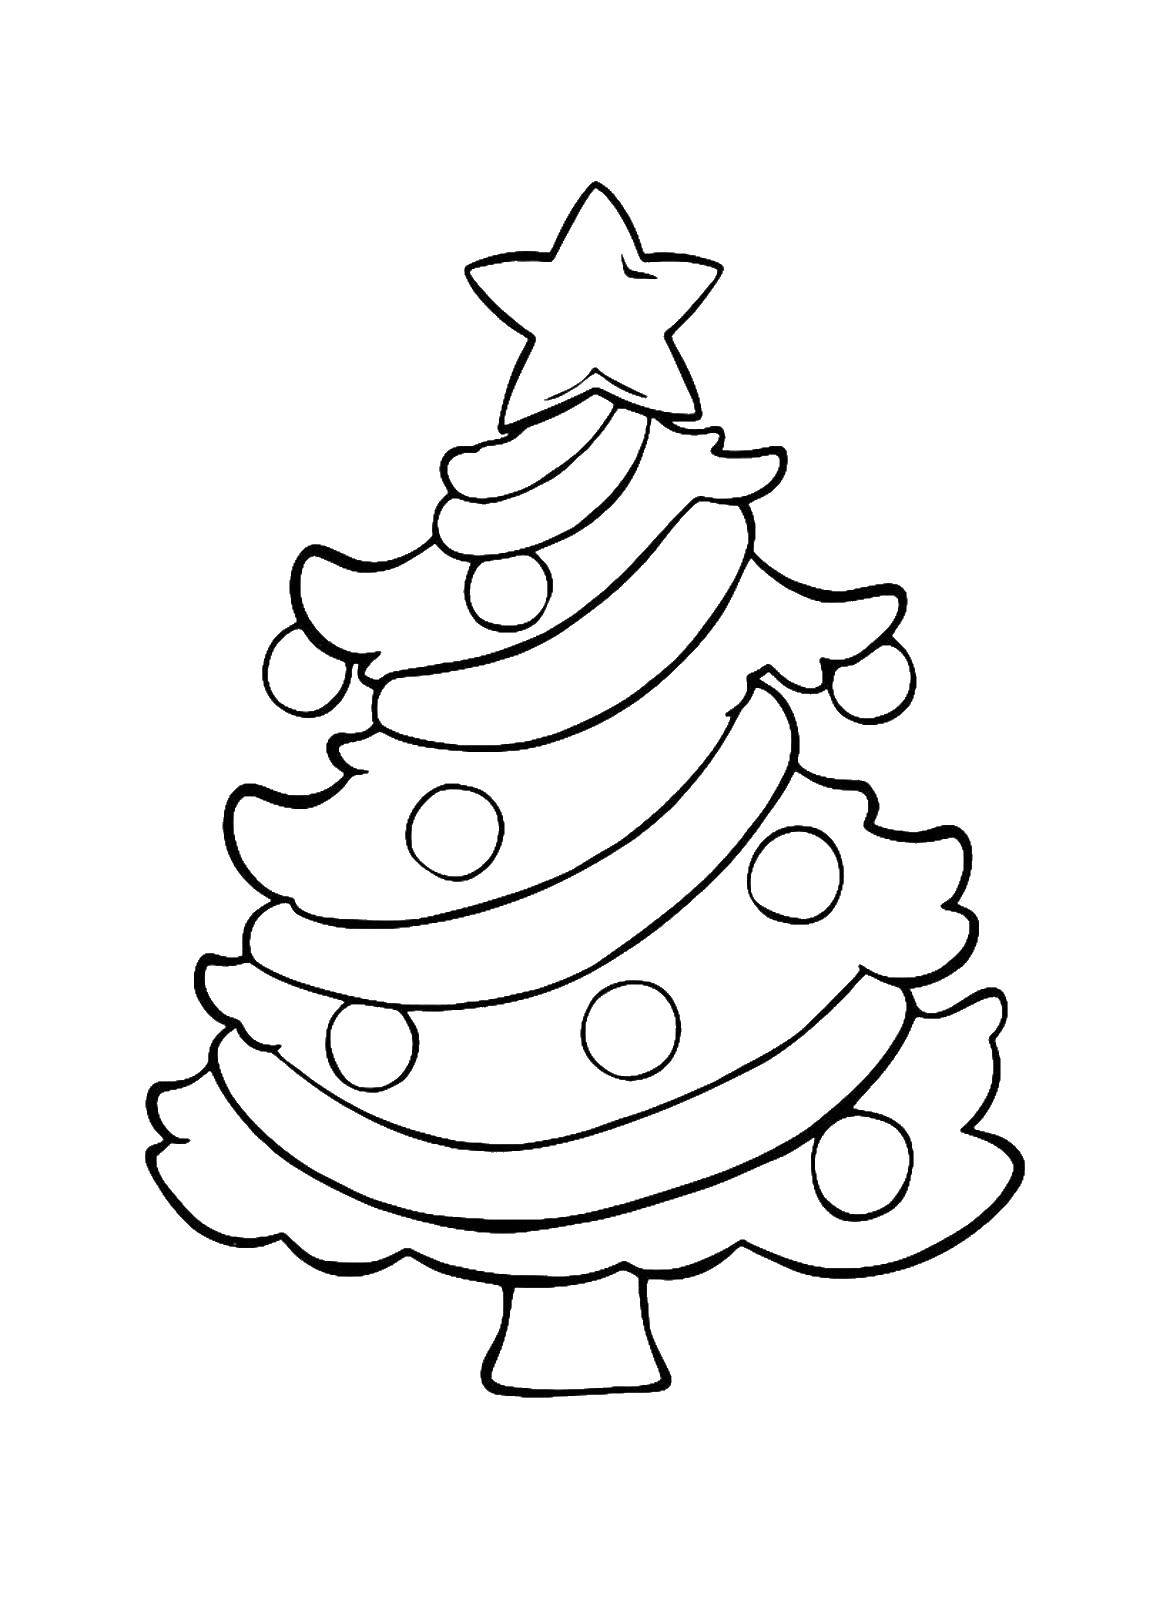 Coloring Christmas tree. Category coloring Christmas tree. Tags:  tree, new year.